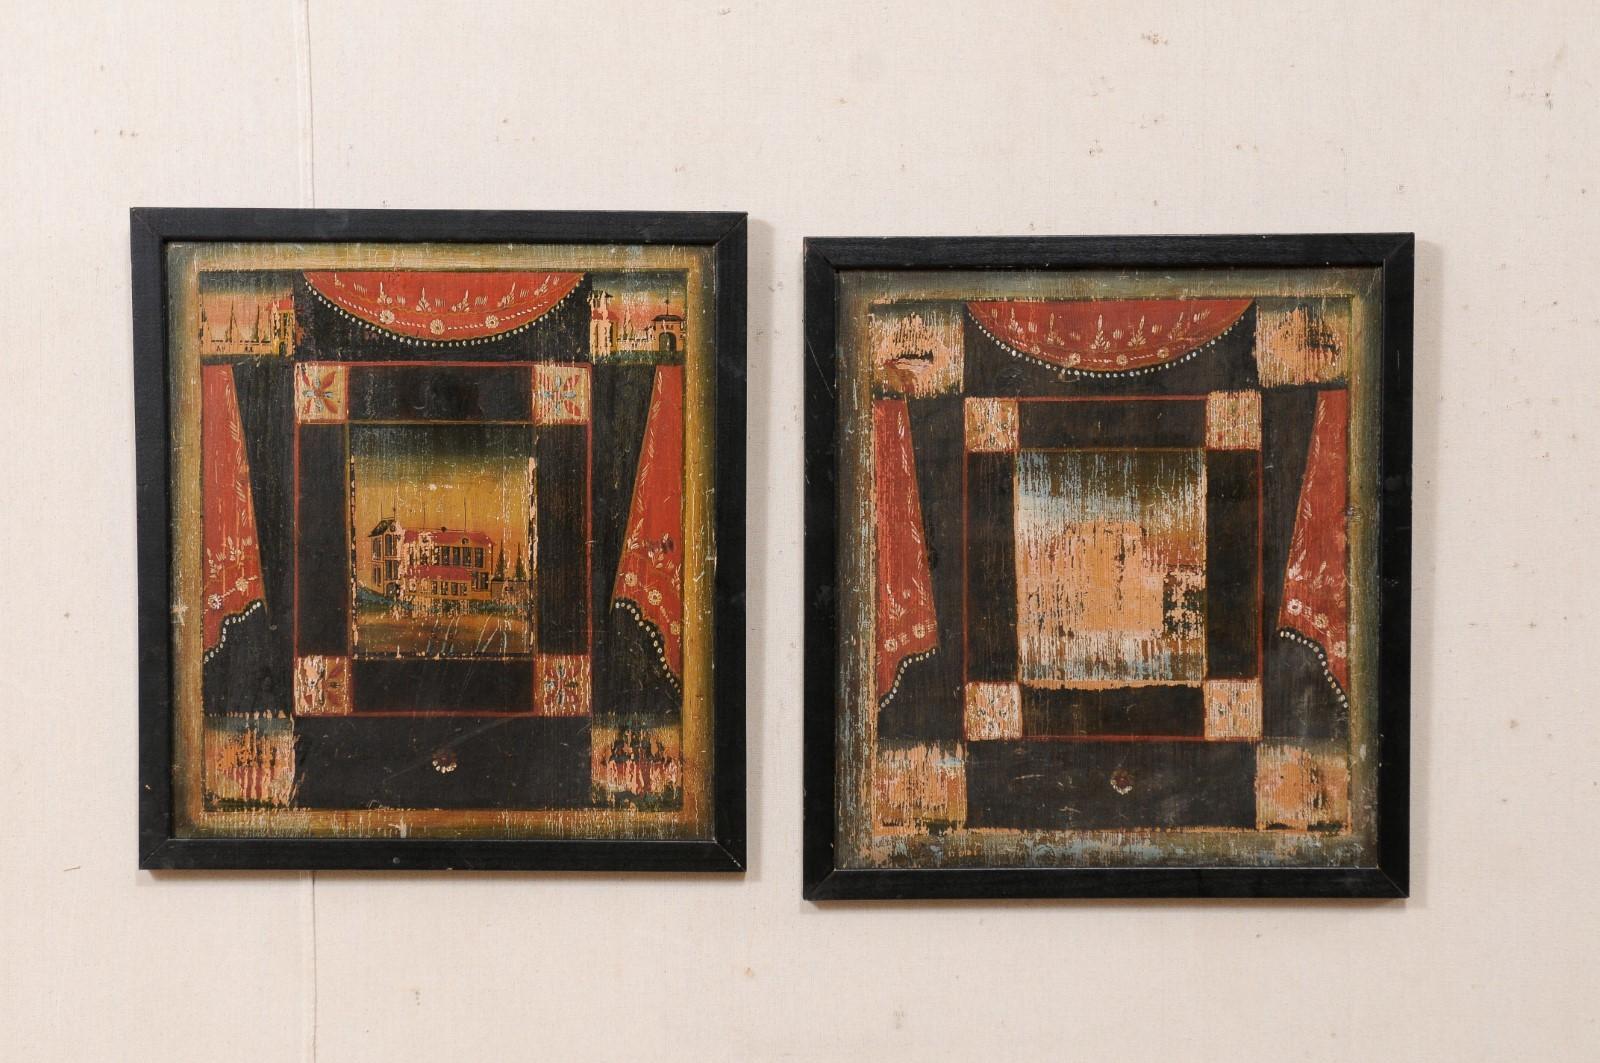 A French pair of painted boards from the 19th century. This antique pair of paintings from France each feature various snippets of hand-painted village scenes, a larger one at center surrounded by a series of smaller ones, and set within a painted